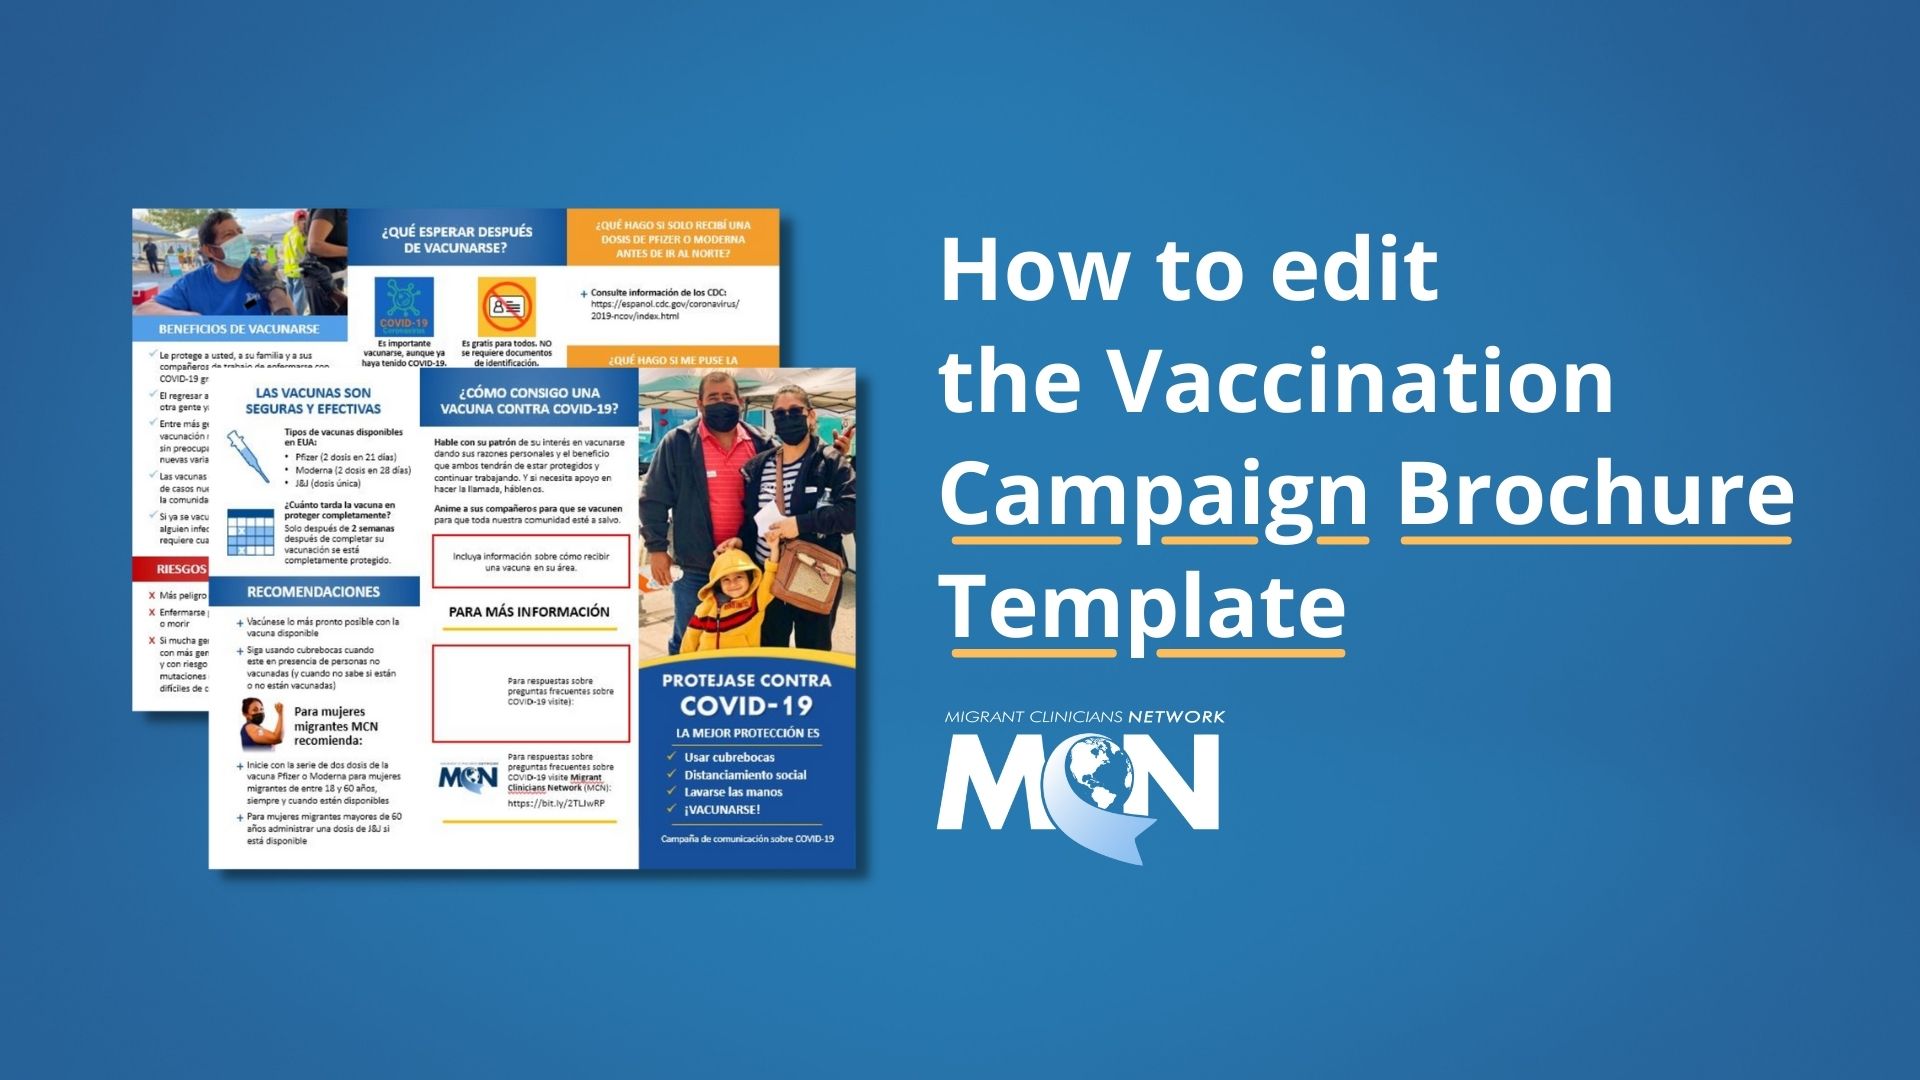 Video - How to Edit the Vaccination Campaign Brochure Template